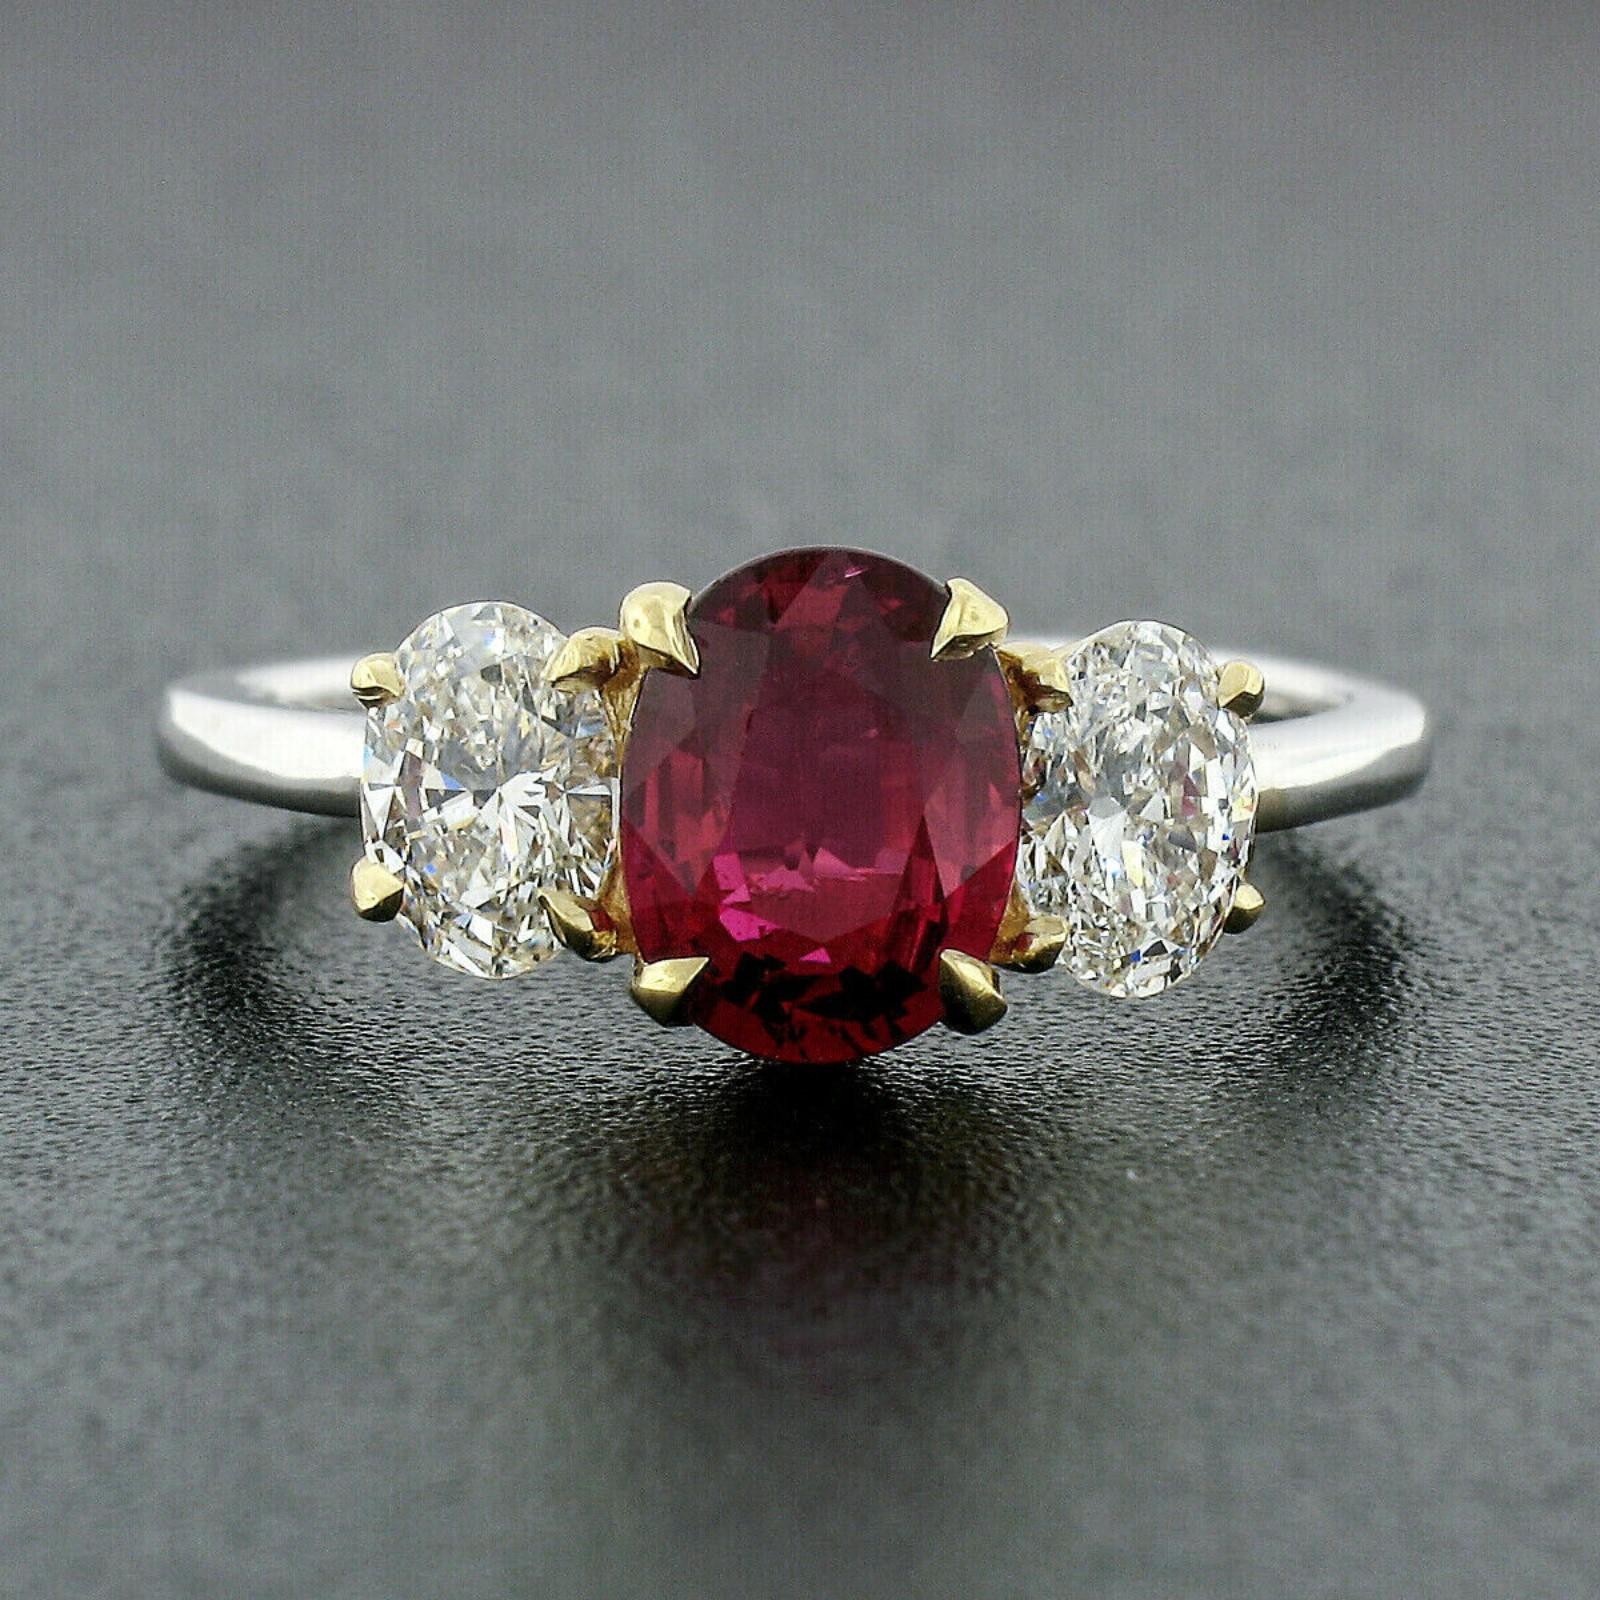 You are looking at a truly breathtaking ruby and diamond three stone engagement ring, hand crafted in solid 18k gold. The ring features a truly mesmerizing, GIA certified ruby solitaire hand set in the solid yellow gold basket and flanked on either